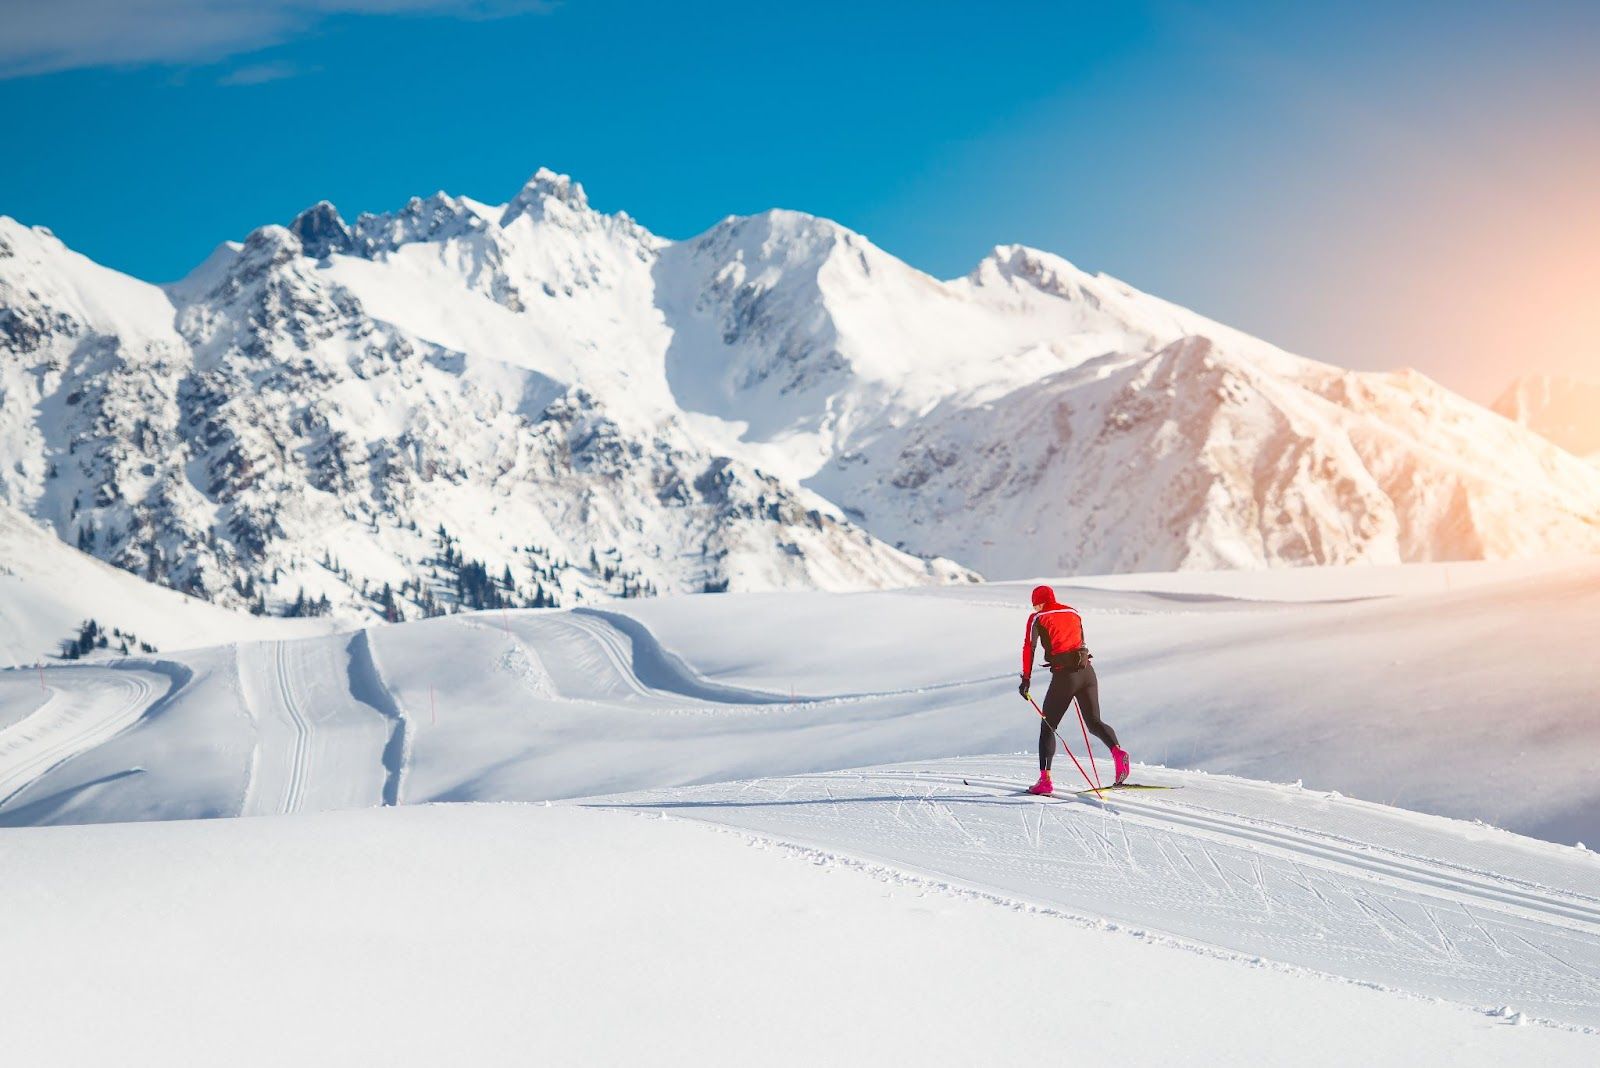 a cross-country skier skiing on the well-prepared slopes in sunny weather